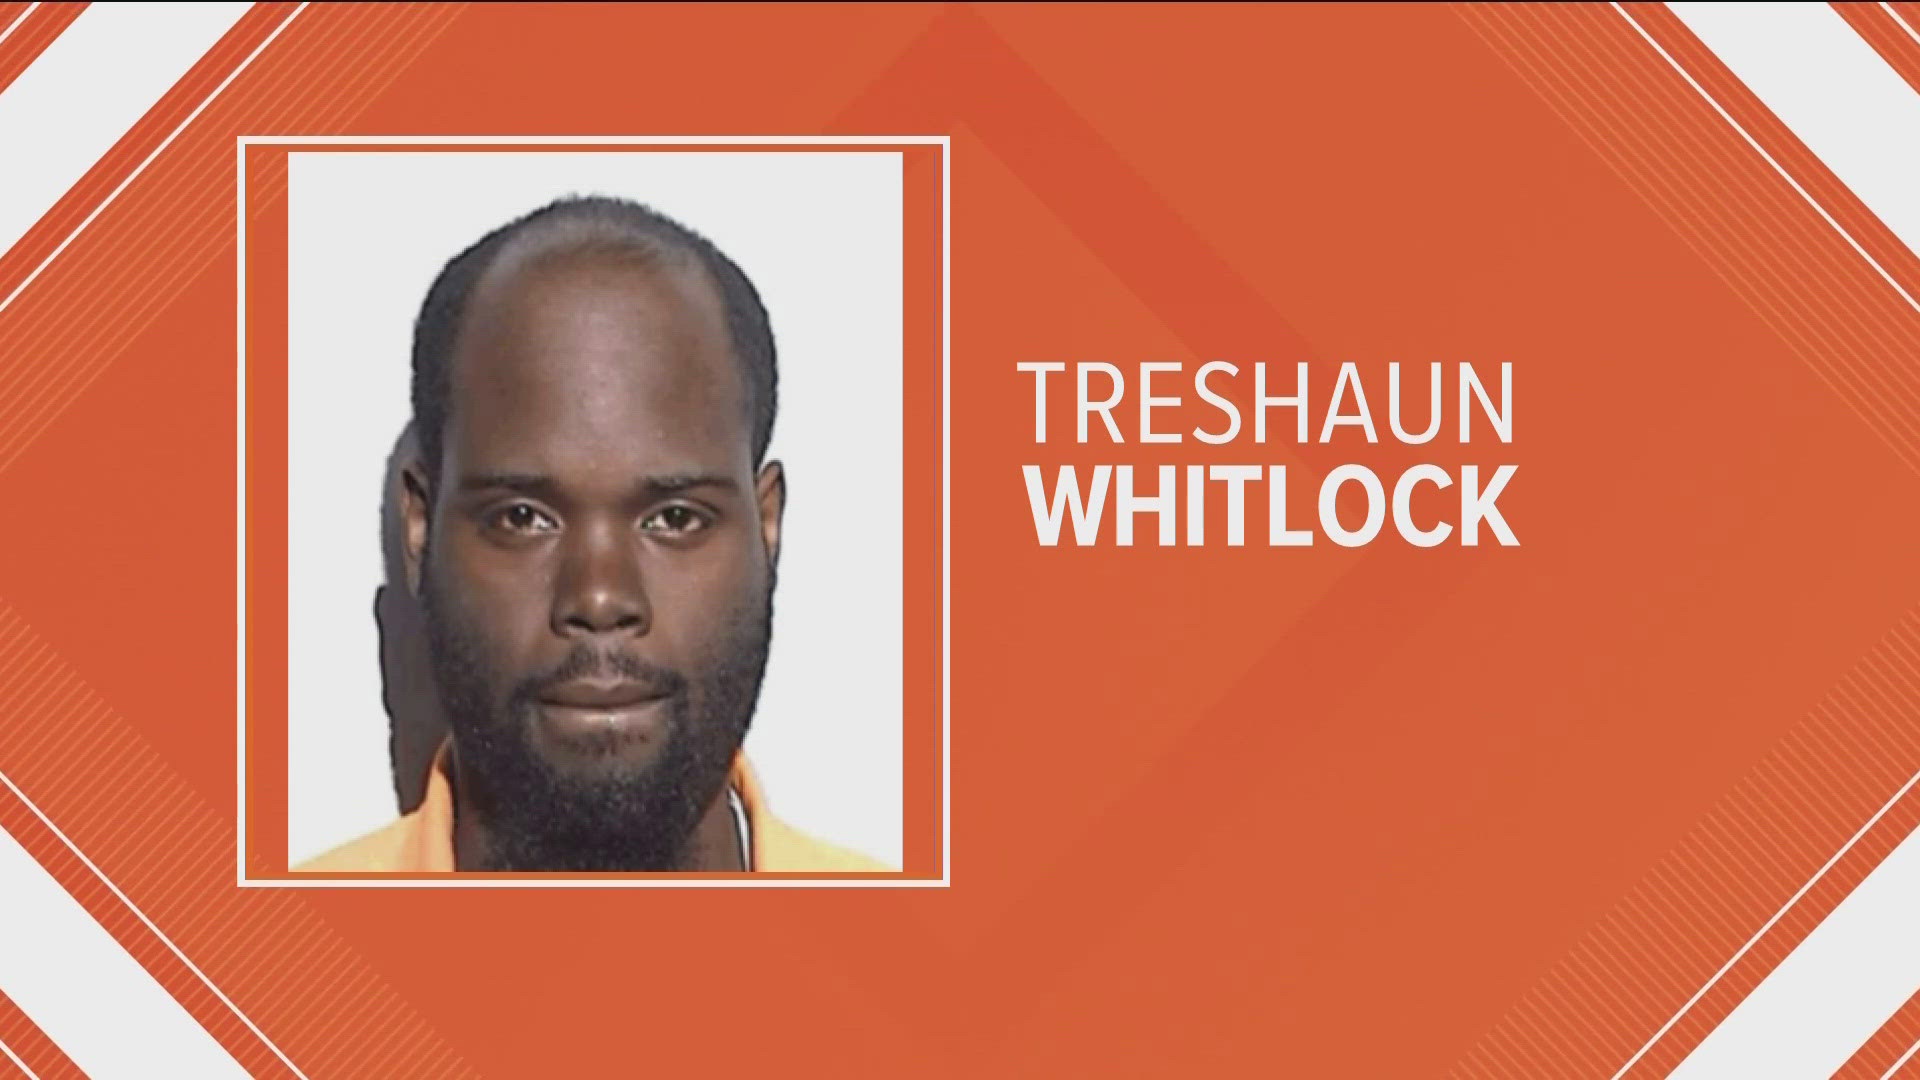 Treshaun Whitlock was charged with murder in the shooting death of a 19-year-old.